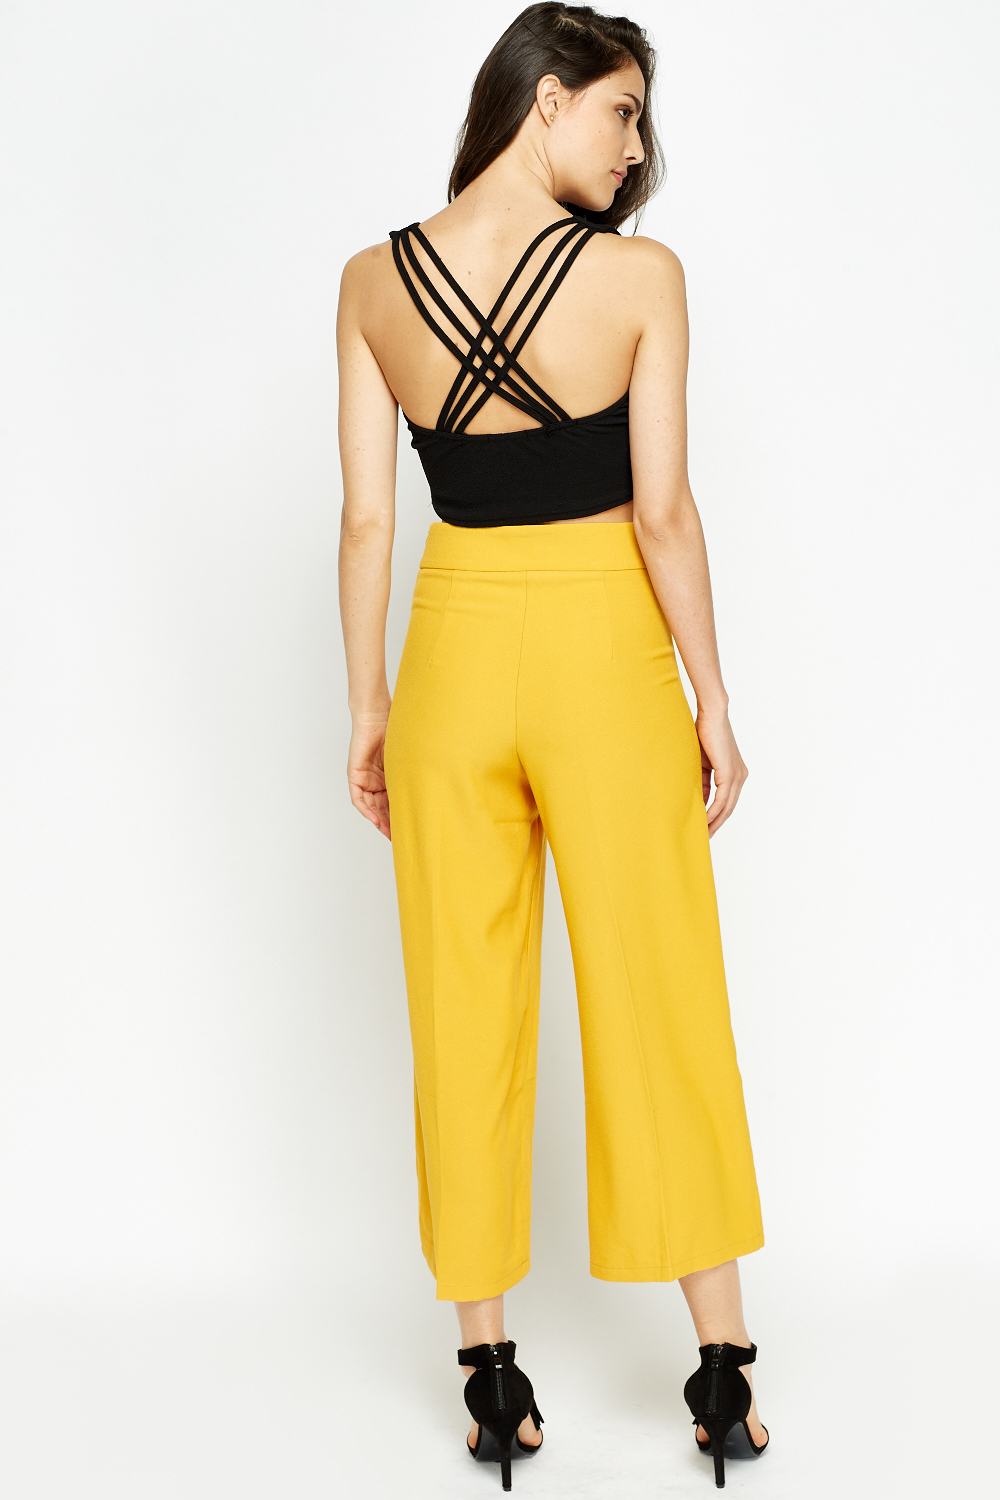 High Waisted Mustard Trousers - Just $7